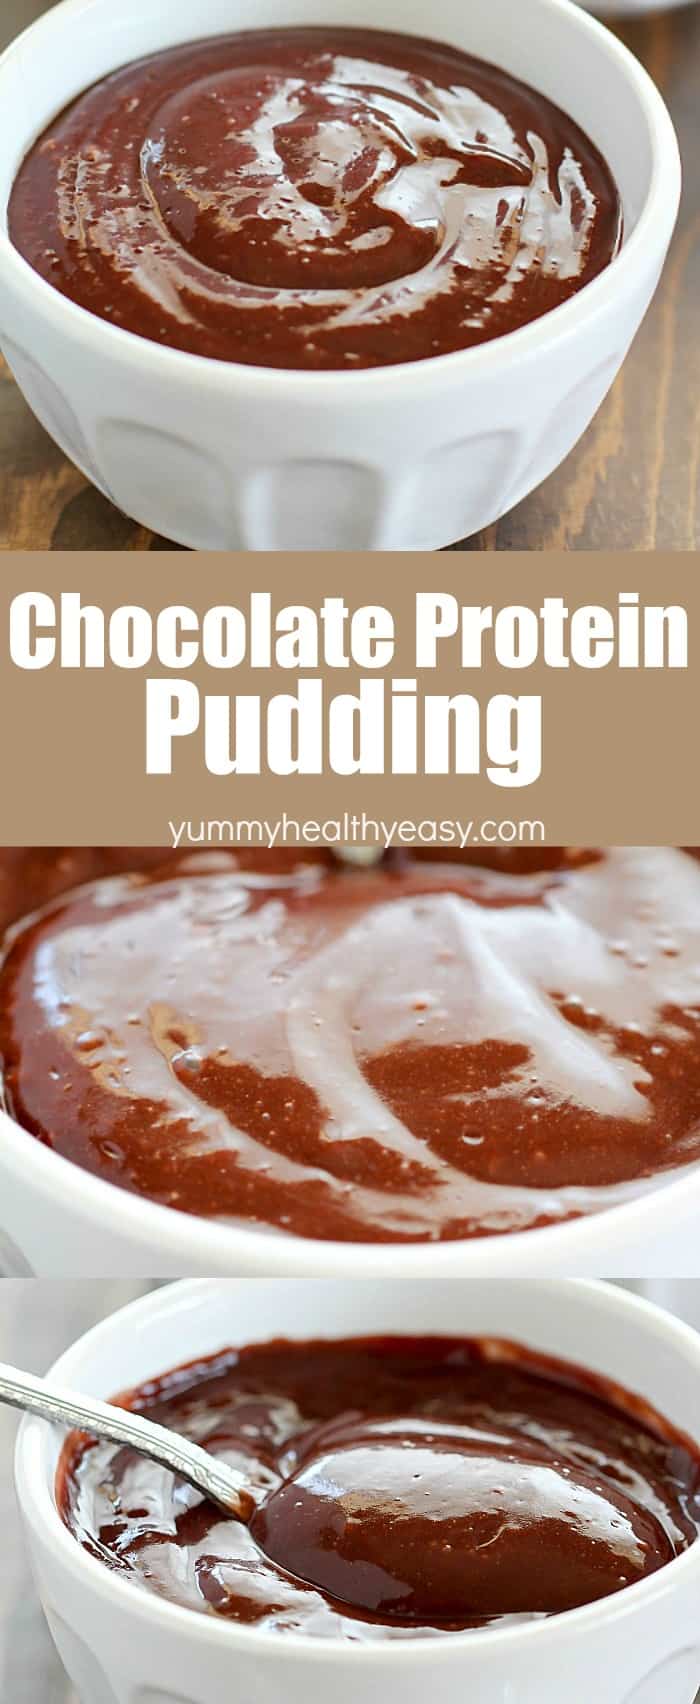 Looking for a diet-friendly dessert? Check out this Protein Pudding Recipe! Only a couple of ingredients for a delicious chocolatey dessert filled with protein! #AD